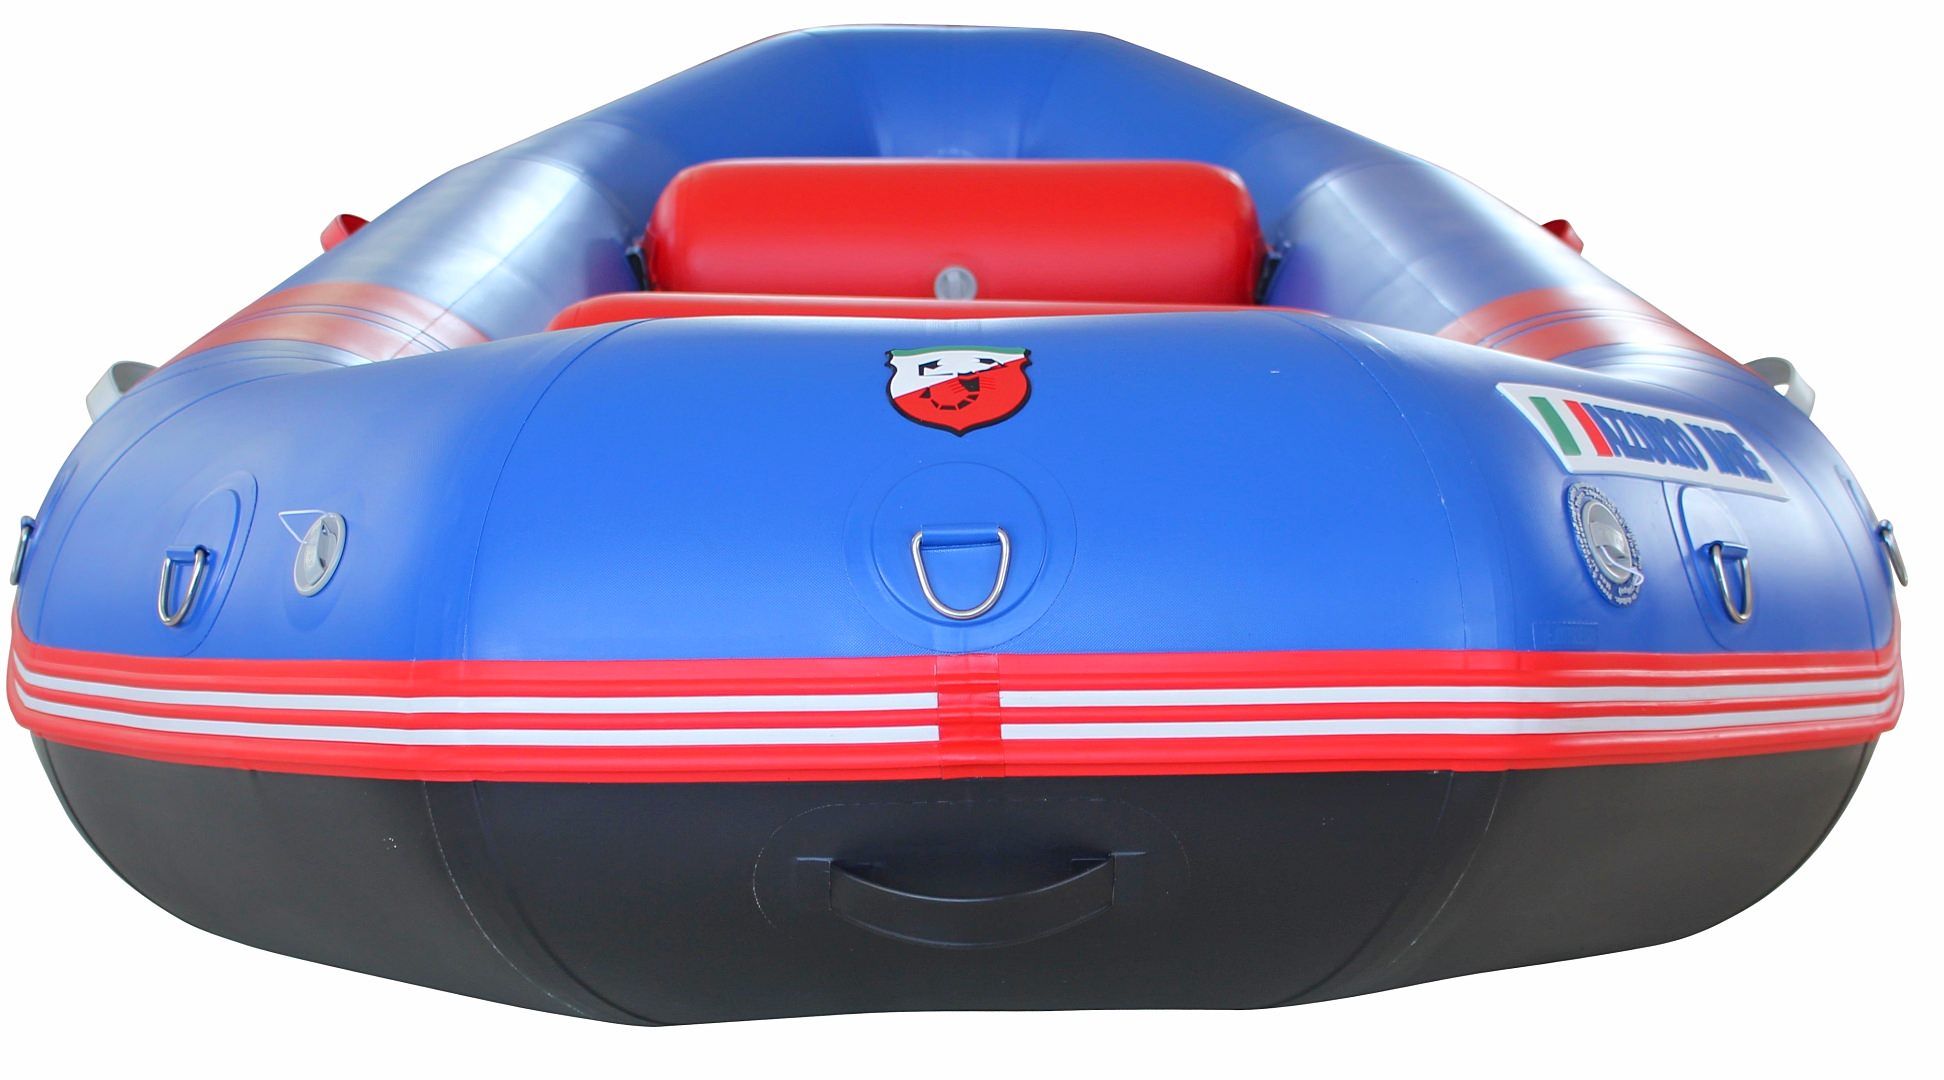 13' Whitewater Inflatable Rafts AMR385